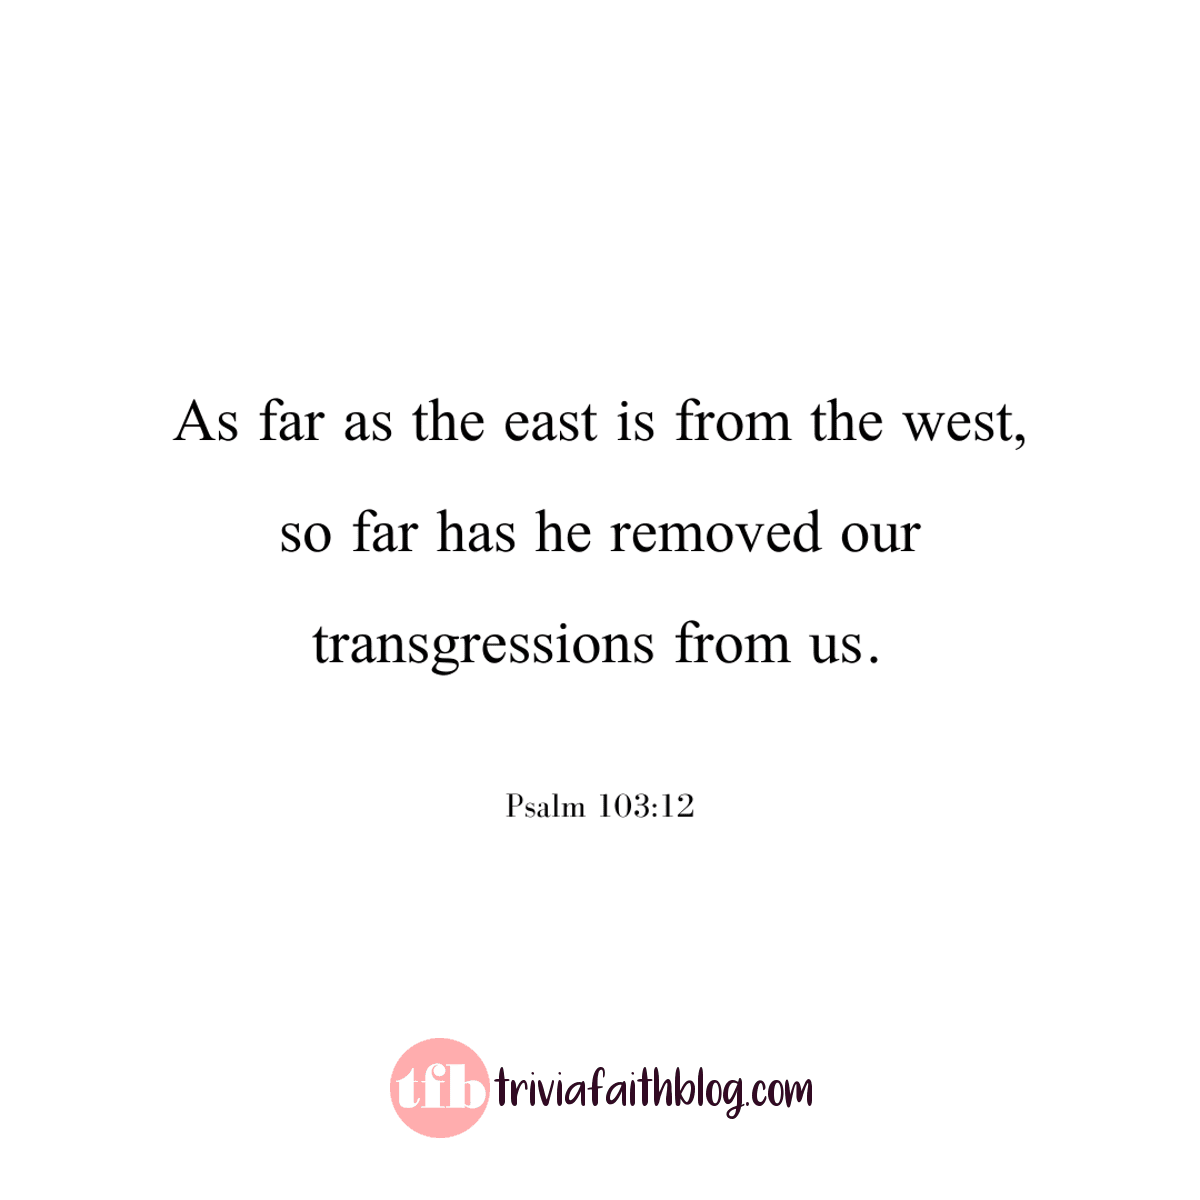 as far as the east is from the west, so far has he removed our transgressions from us